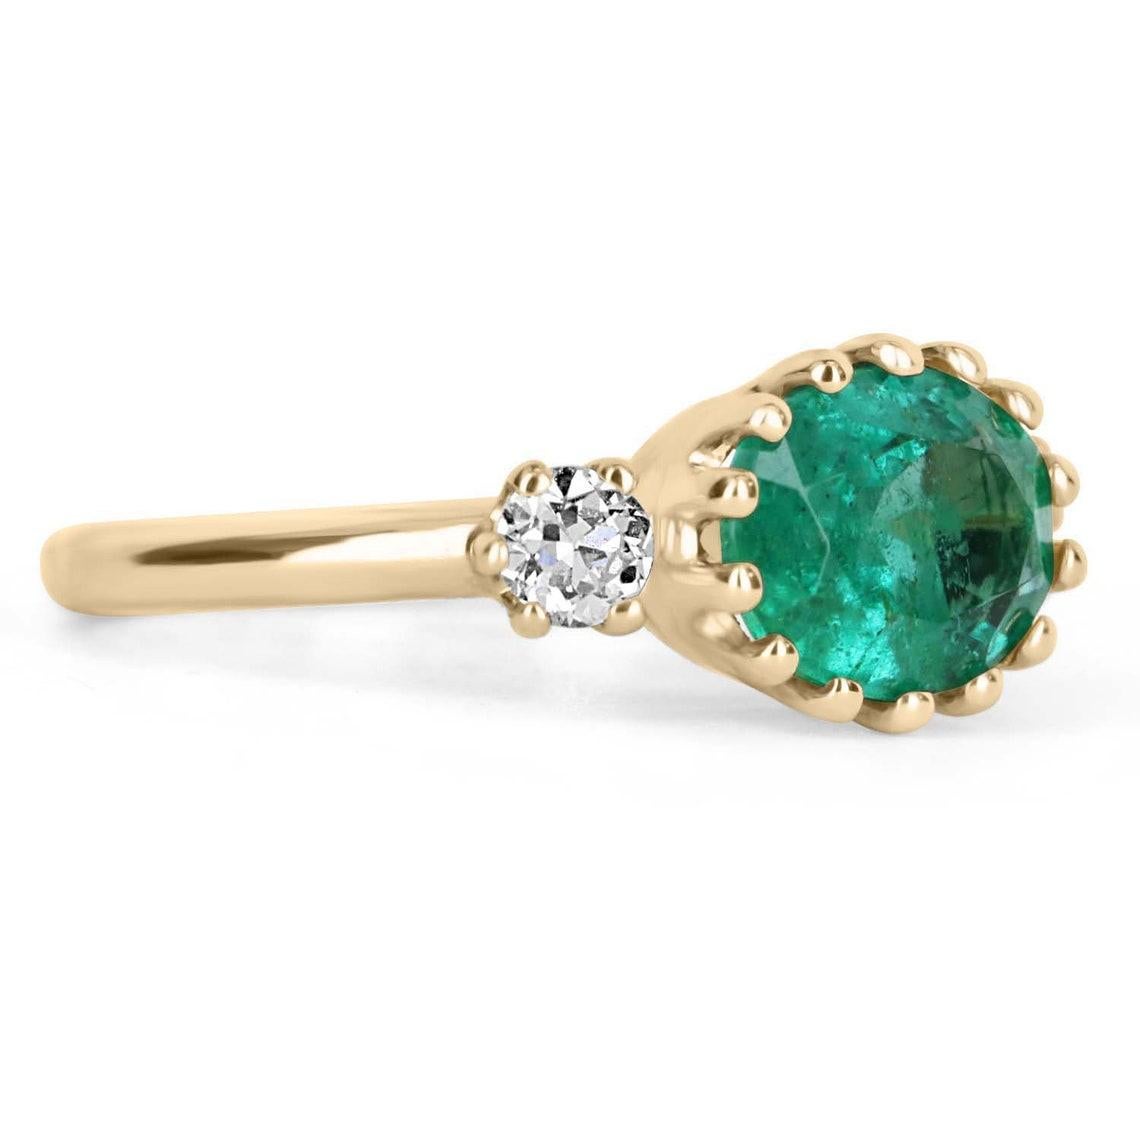 Featured here is a redefined emerald and diamond three-stone ring. This eccentric design showcases a natural 2.20-carat oval emerald set in a 14-prong setting. Accented are two brilliant round diamonds also set in a 5-prong setting on both sides.